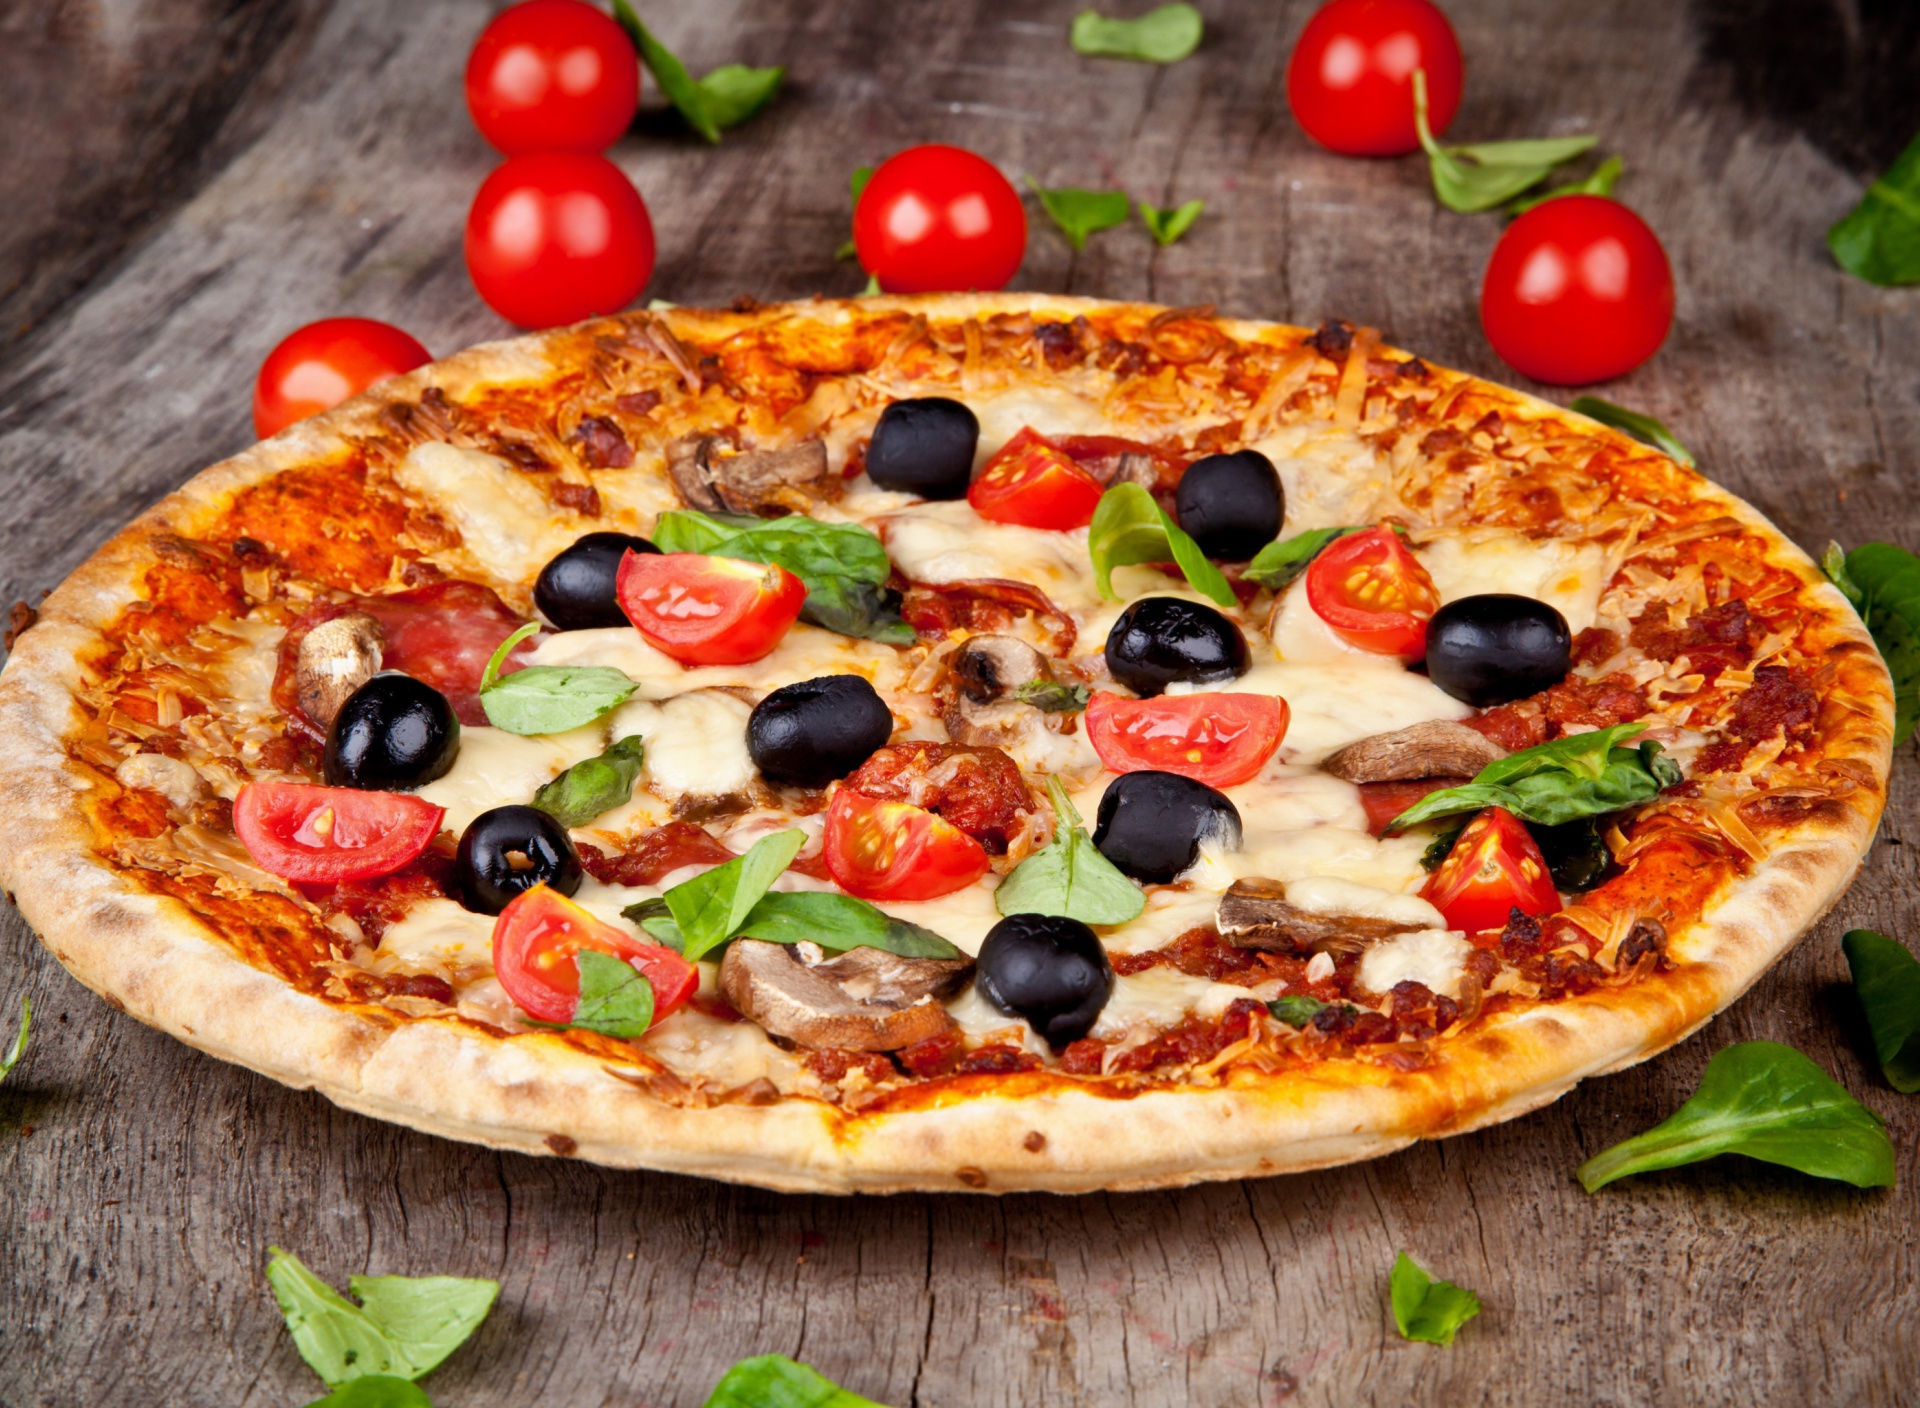 Pizza with tomatoes and olives screenshot #1 1920x1408